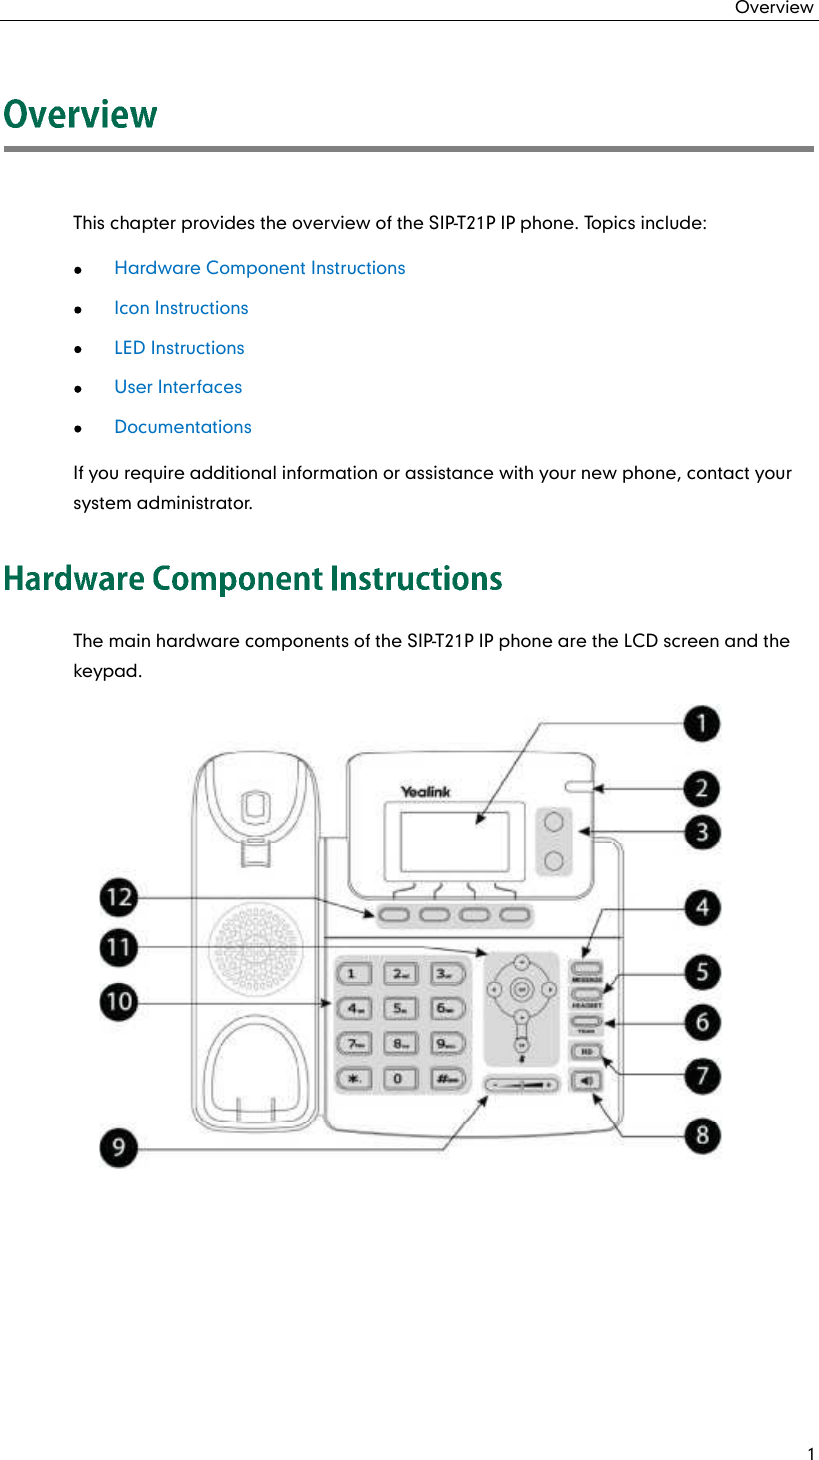 Overview 1 This chapter provides the overview of the SIP-T21P IP phone. Topics include:  Hardware Component Instructions  Icon Instructions  LED Instructions   User Interfaces  Documentations If you require additional information or assistance with your new phone, contact your system administrator. The main hardware components of the SIP-T21P IP phone are the LCD screen and the keypad.    